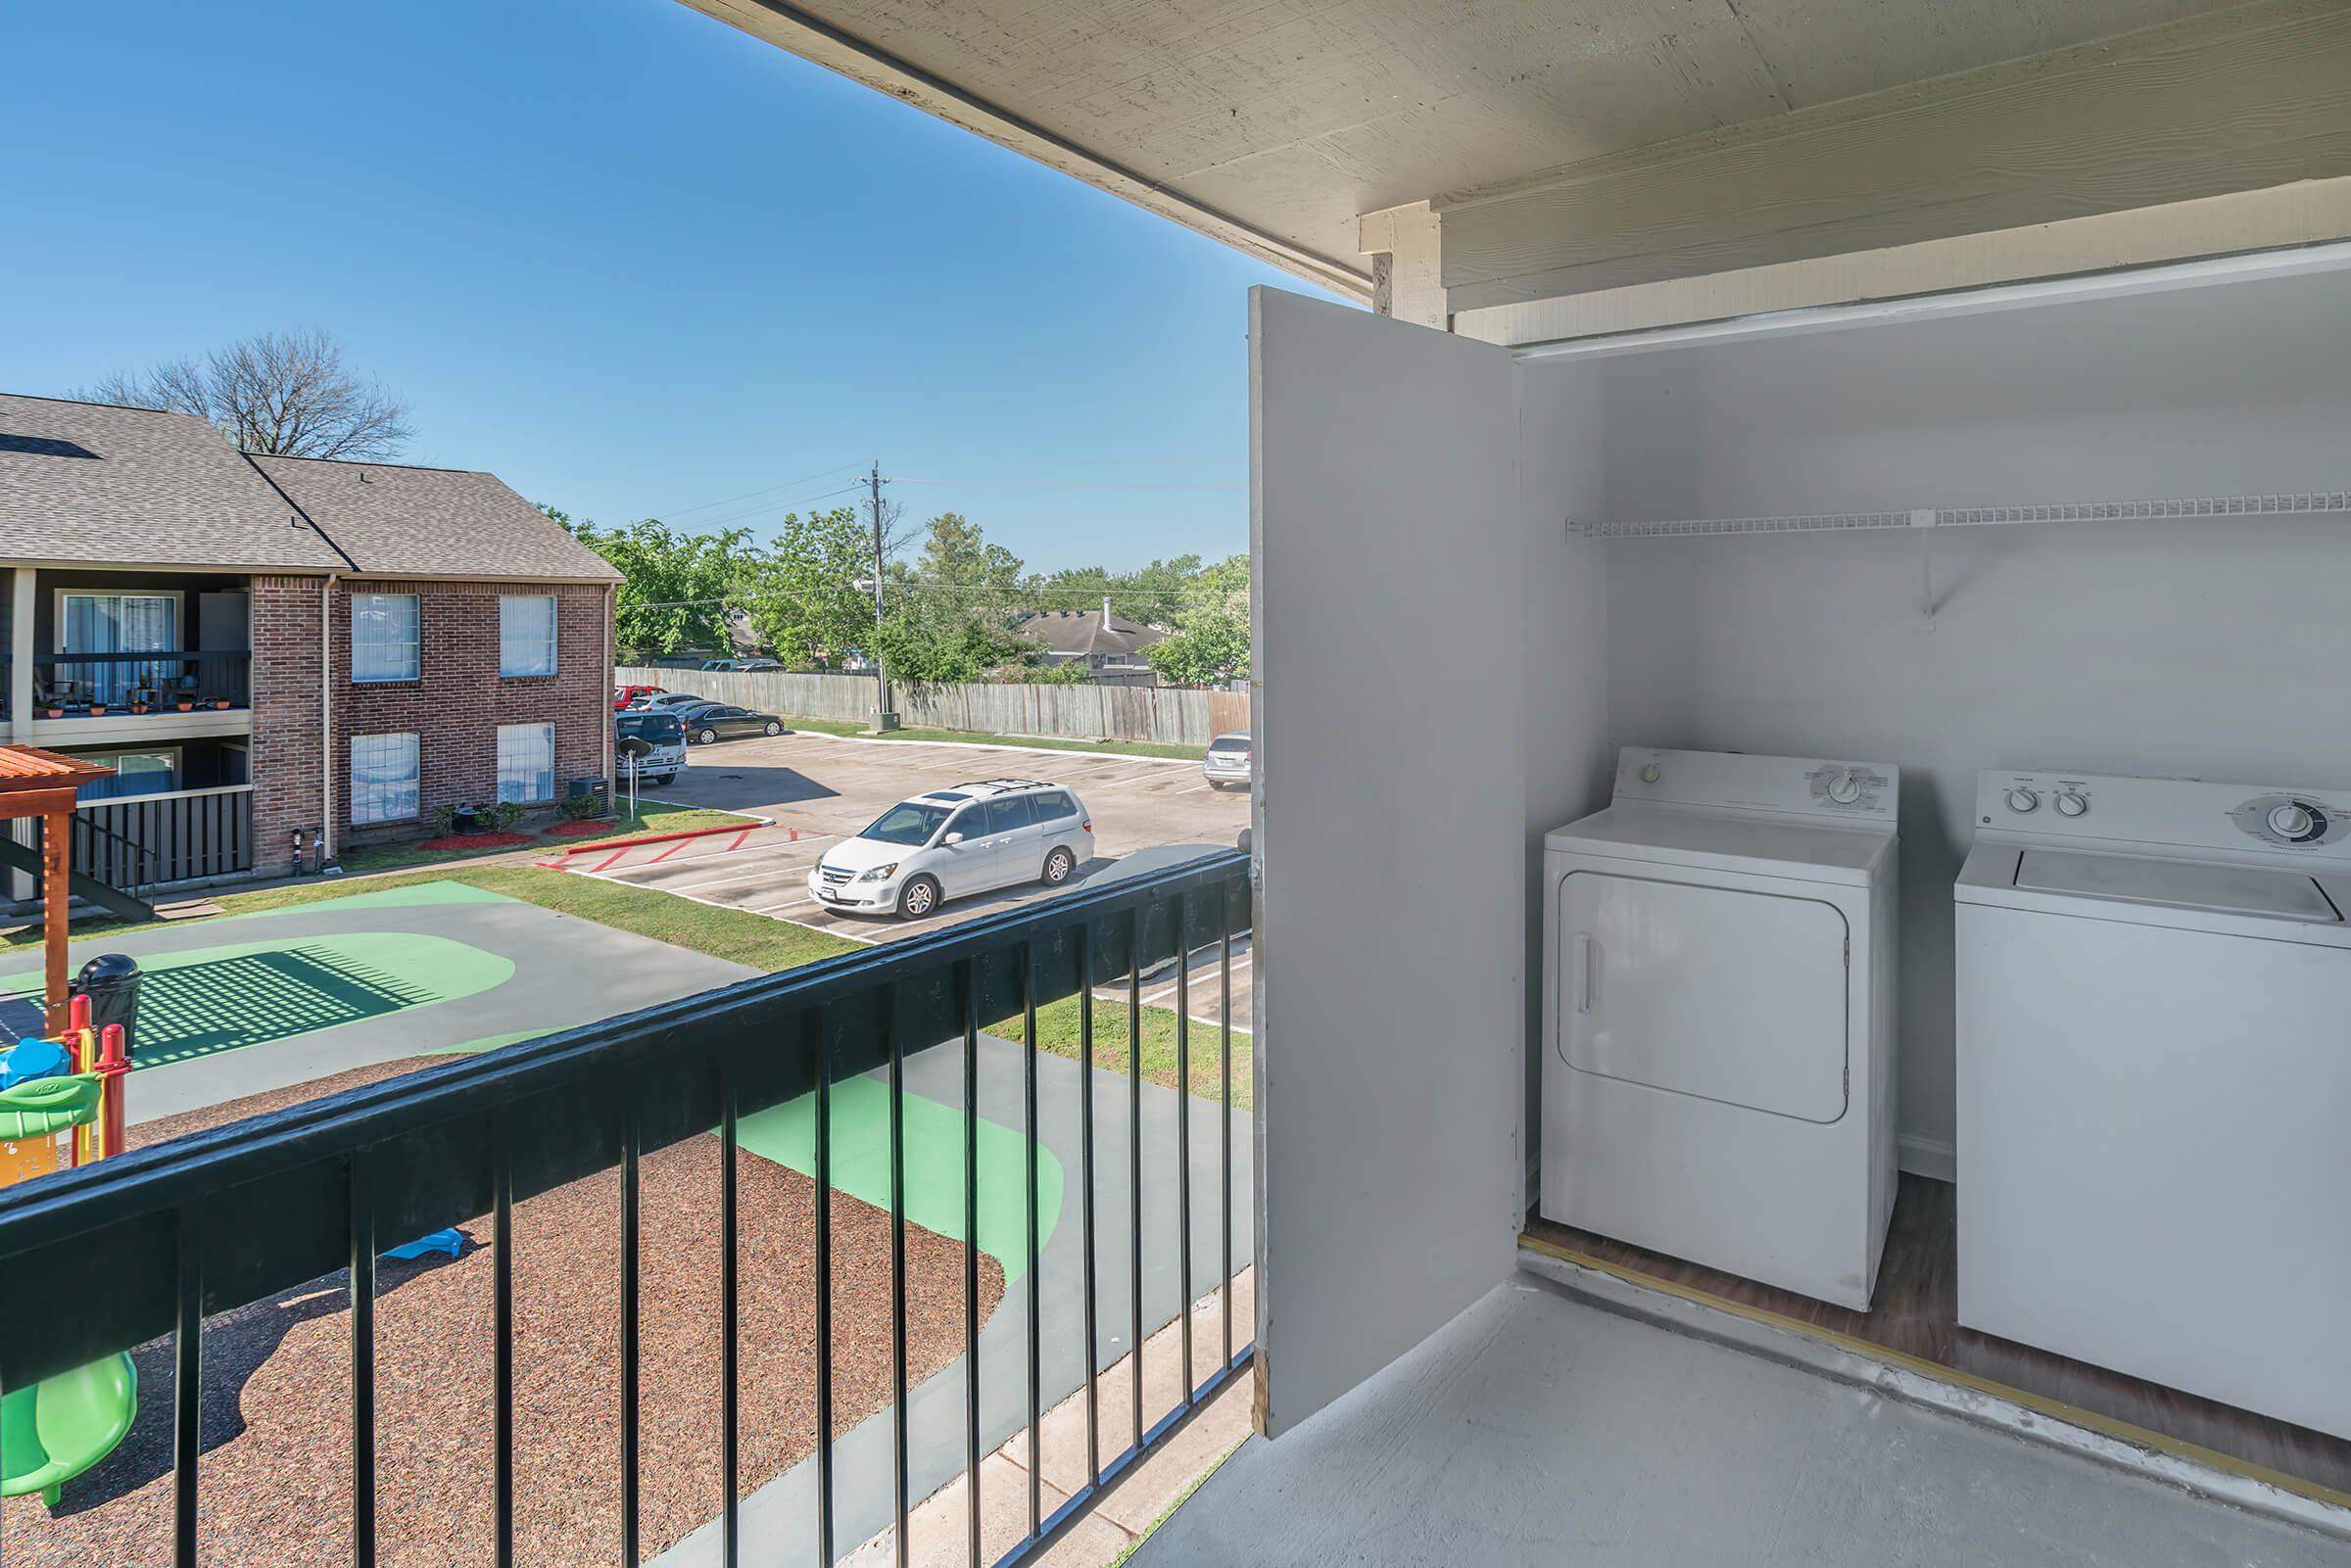 SELECT SYNOTT SQUARE HOMES INCLUDE A WASHER AND DRYER